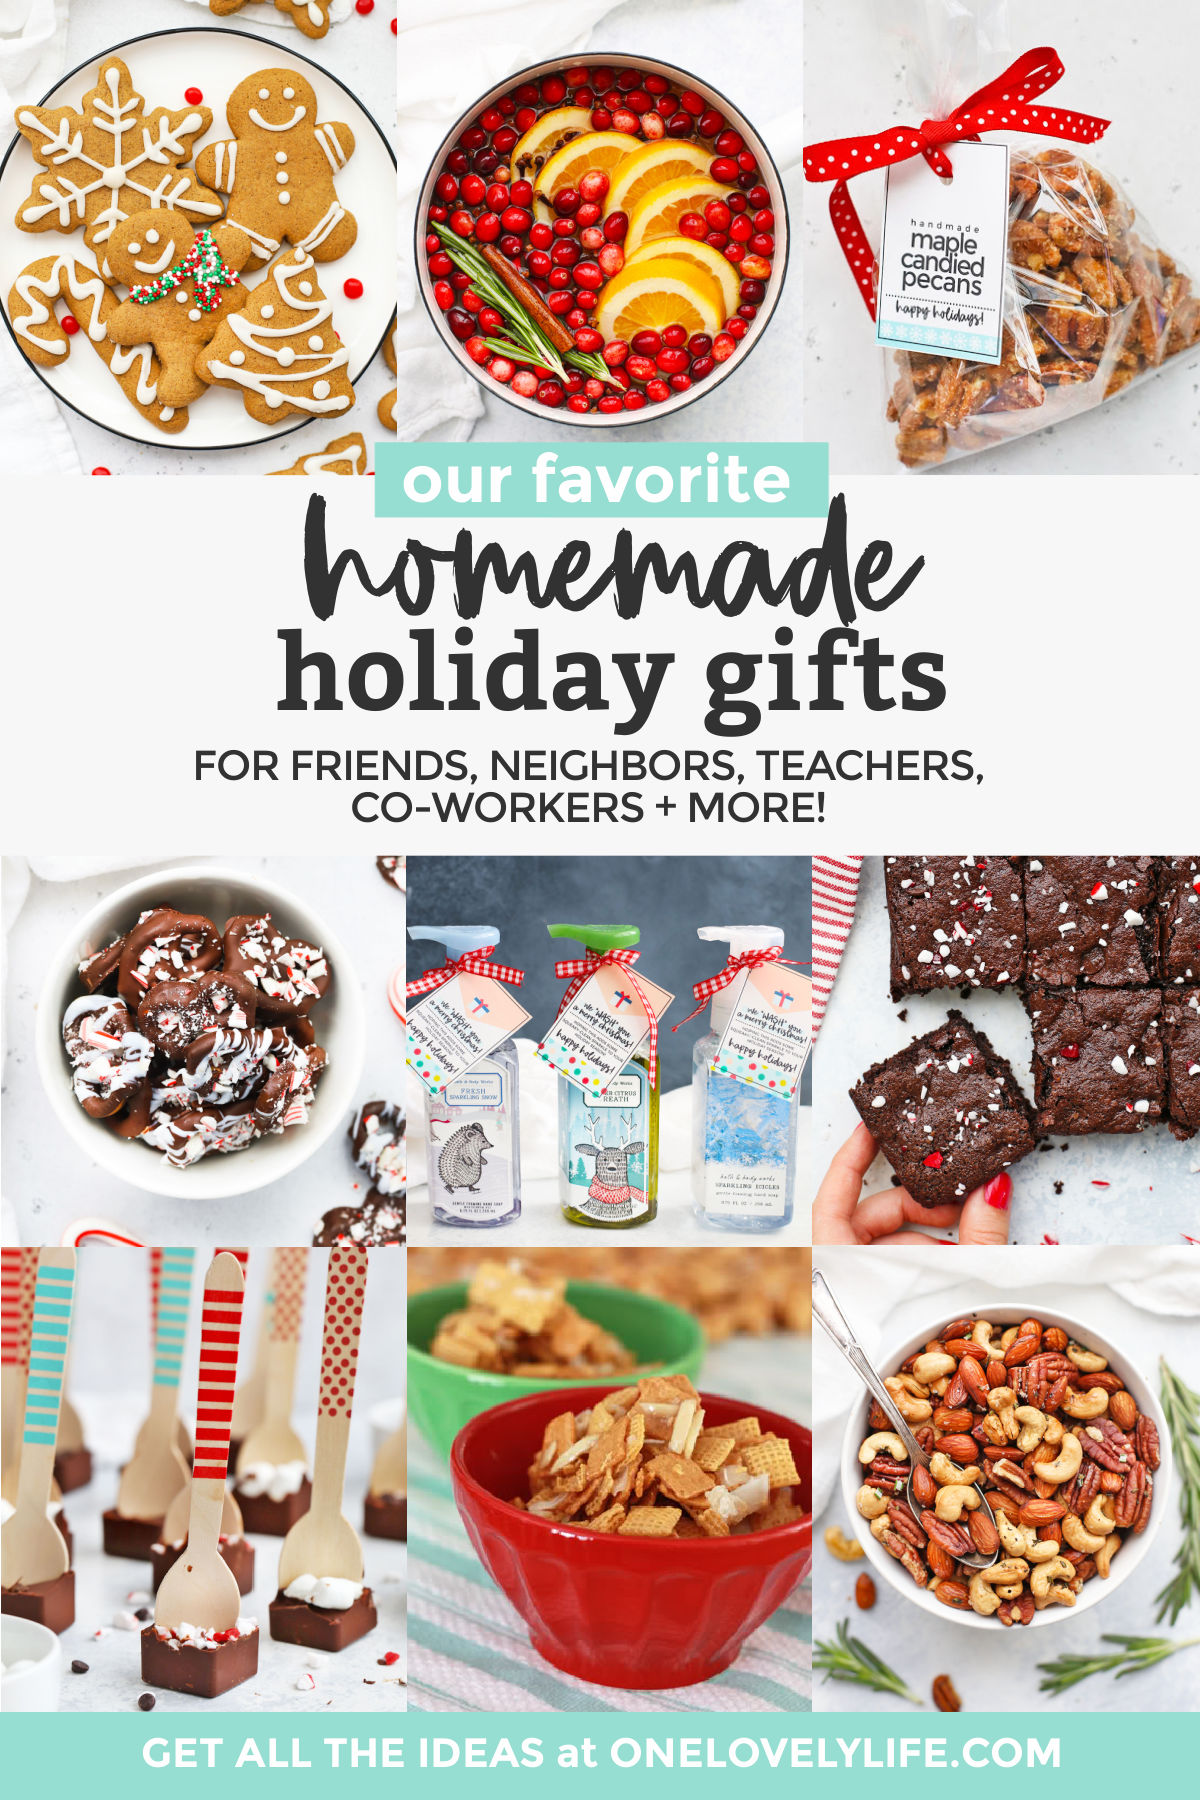 Our Best Homemade Christmas Gifts - These easy DIY holiday gifts are so fun to share with friends, neighbors, teachers, co-workers + more! // DIY Christmas Gifts // Homemade Holiday Gift // Edible Holiday Gift // Christmas Cookie Plate #giftidea #diychristmas #homemadegift